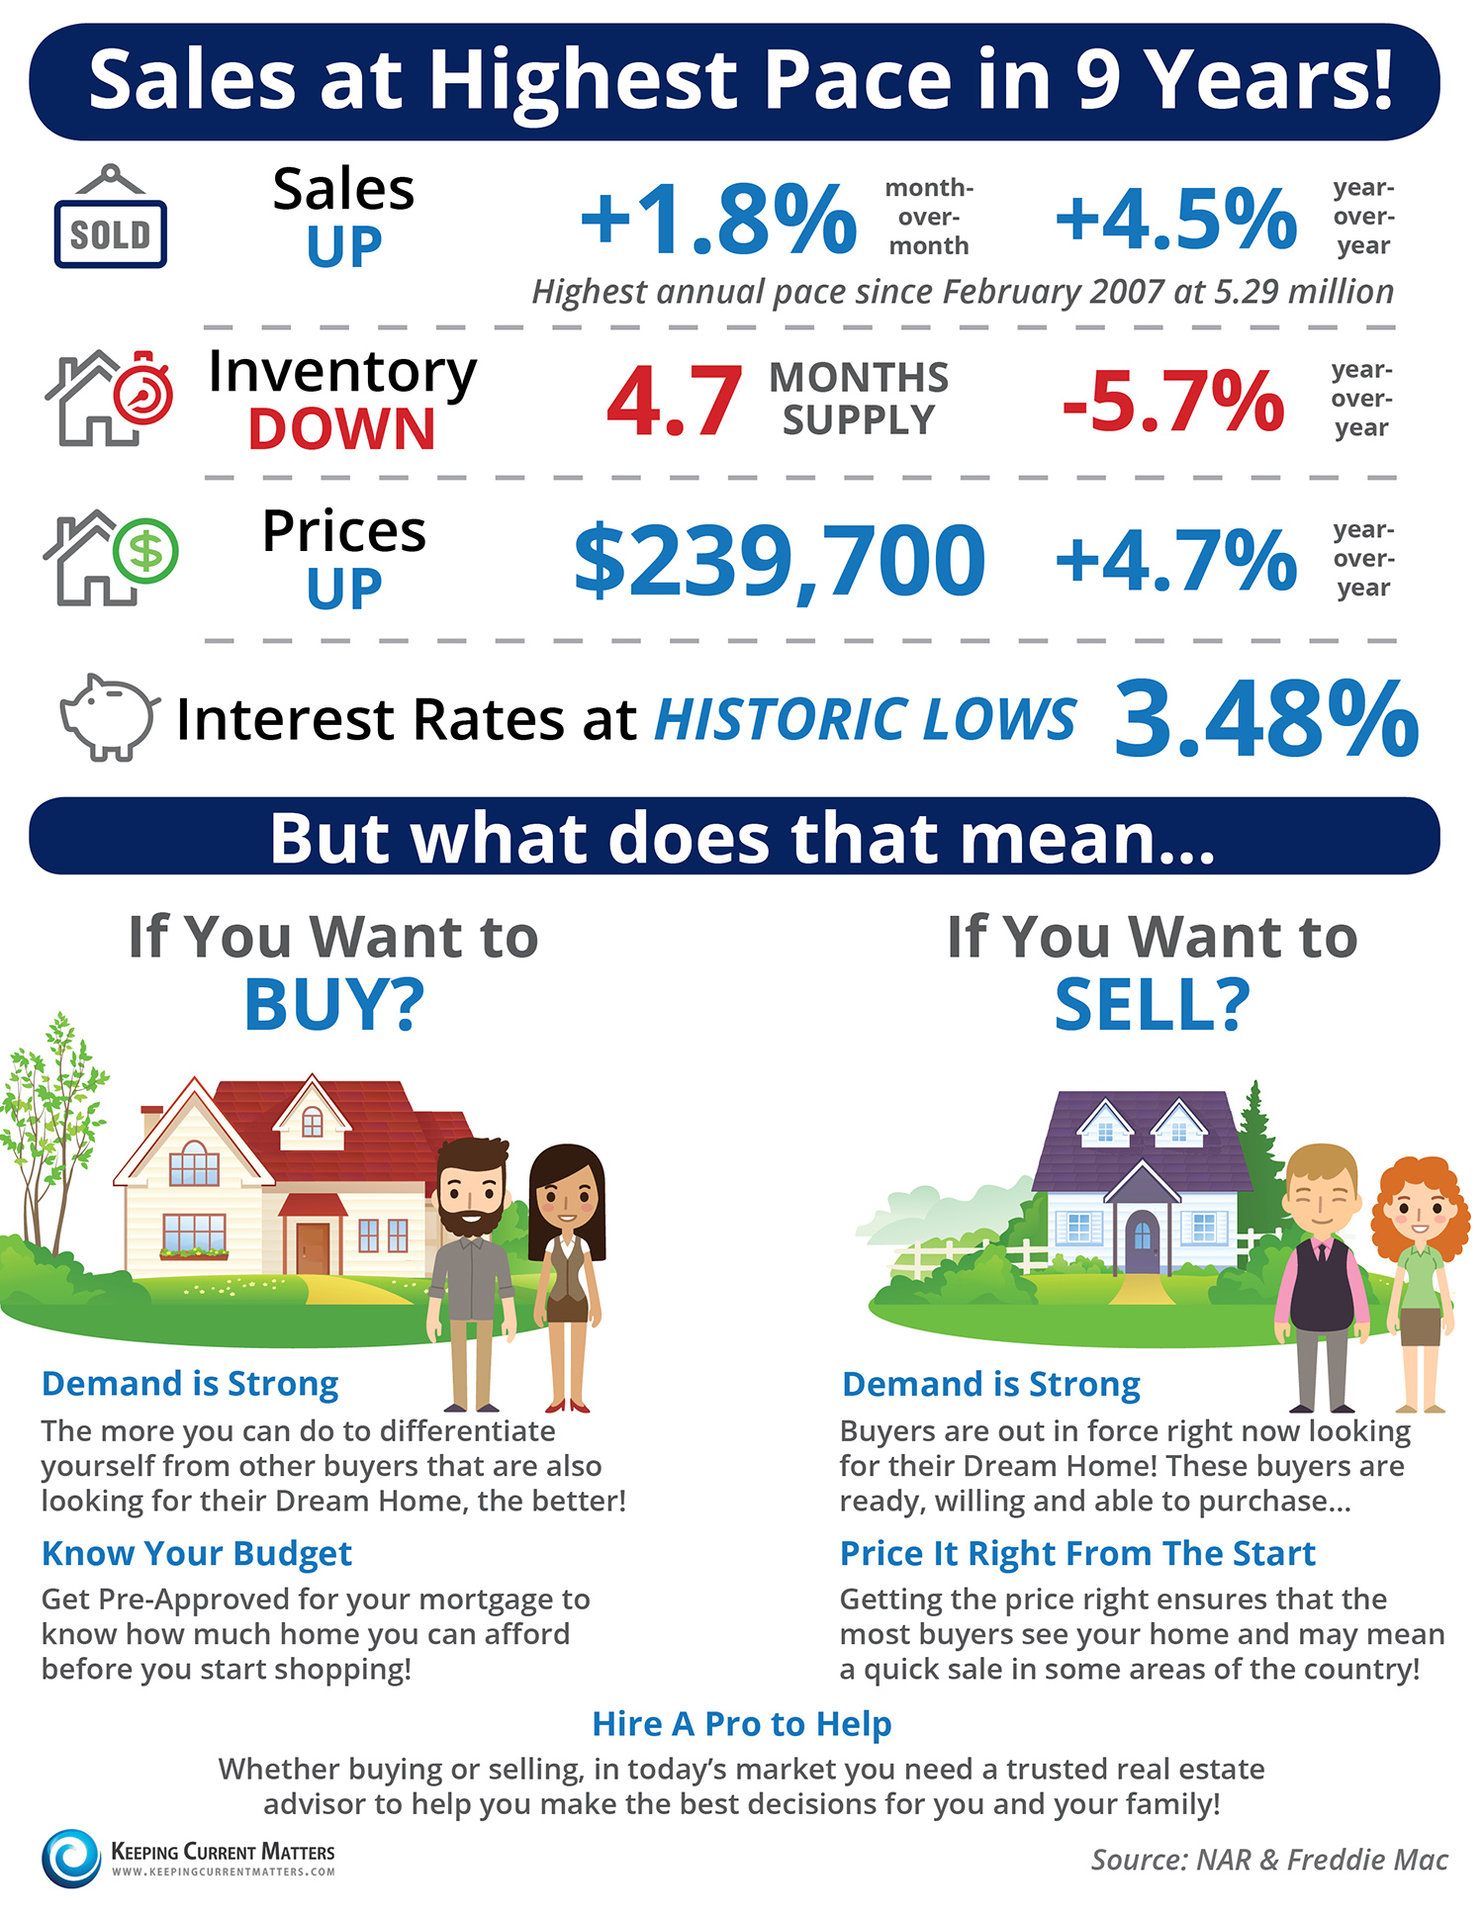 Sales at Highest Pace in 9 Years [INFOGRAPHIC] | Keeping Current Matters